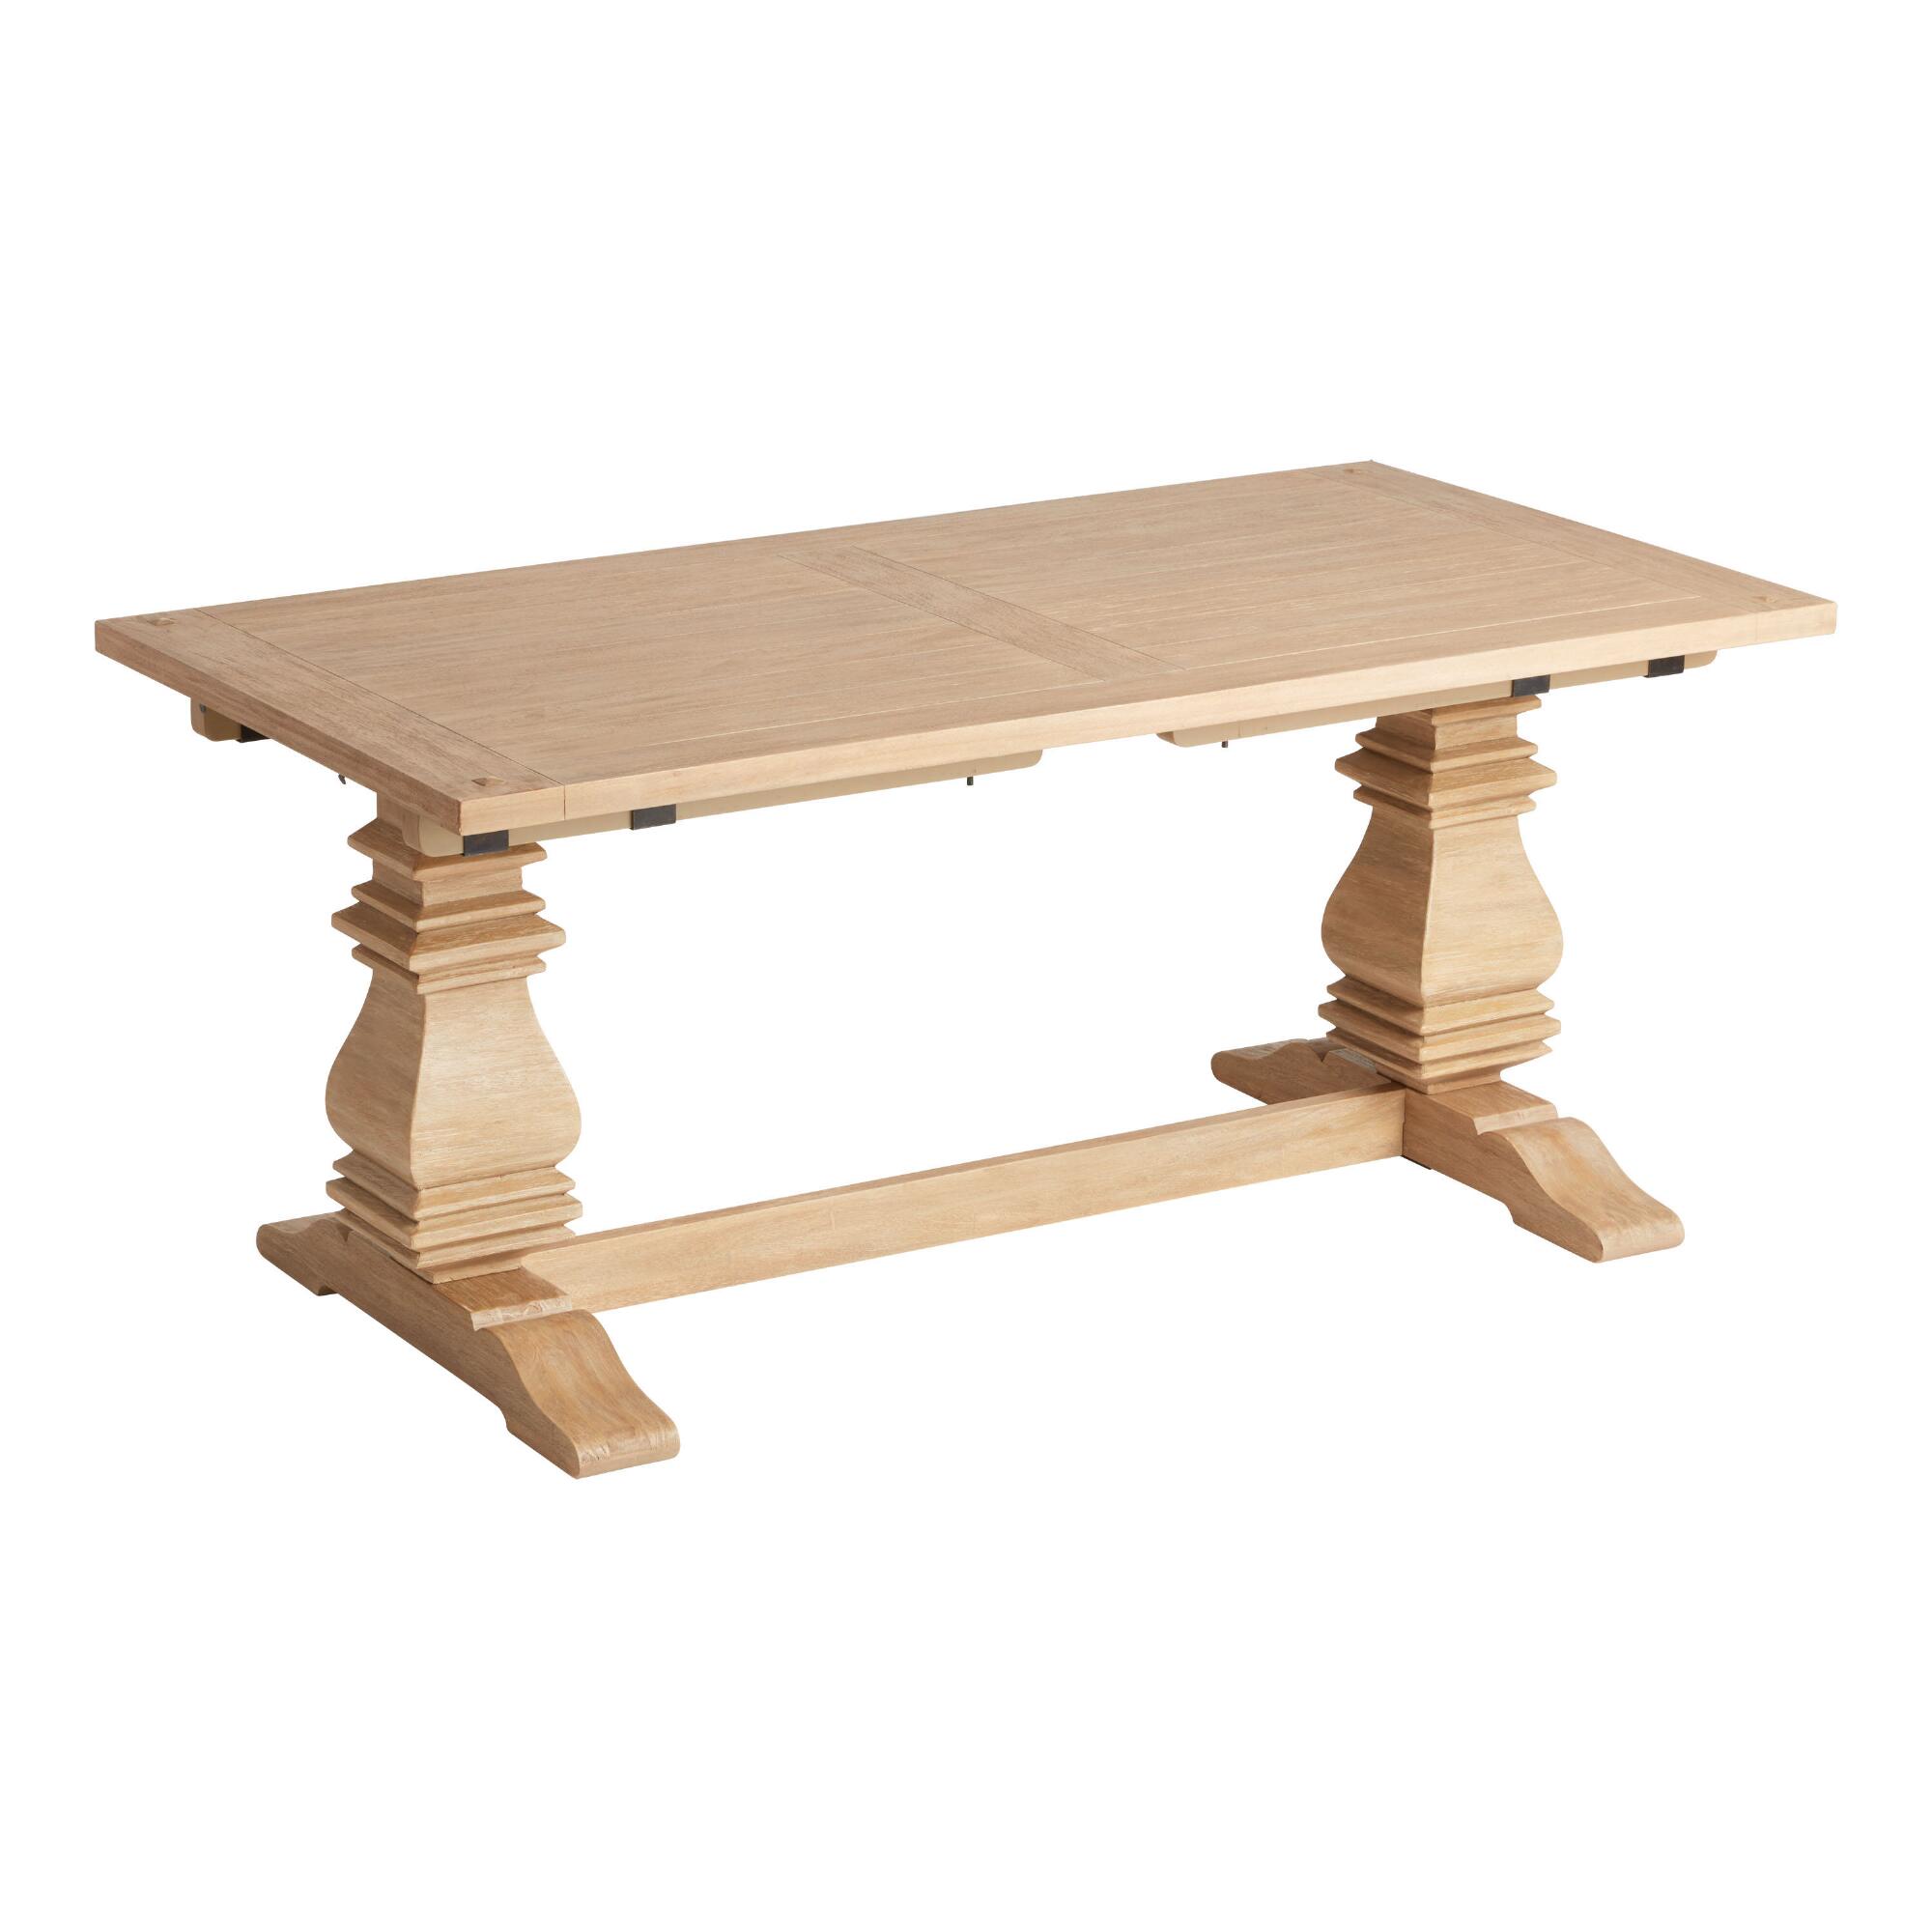 Natural Washed Wood Avila Extension Dining Table: Brown/Natural/Wood by World Market